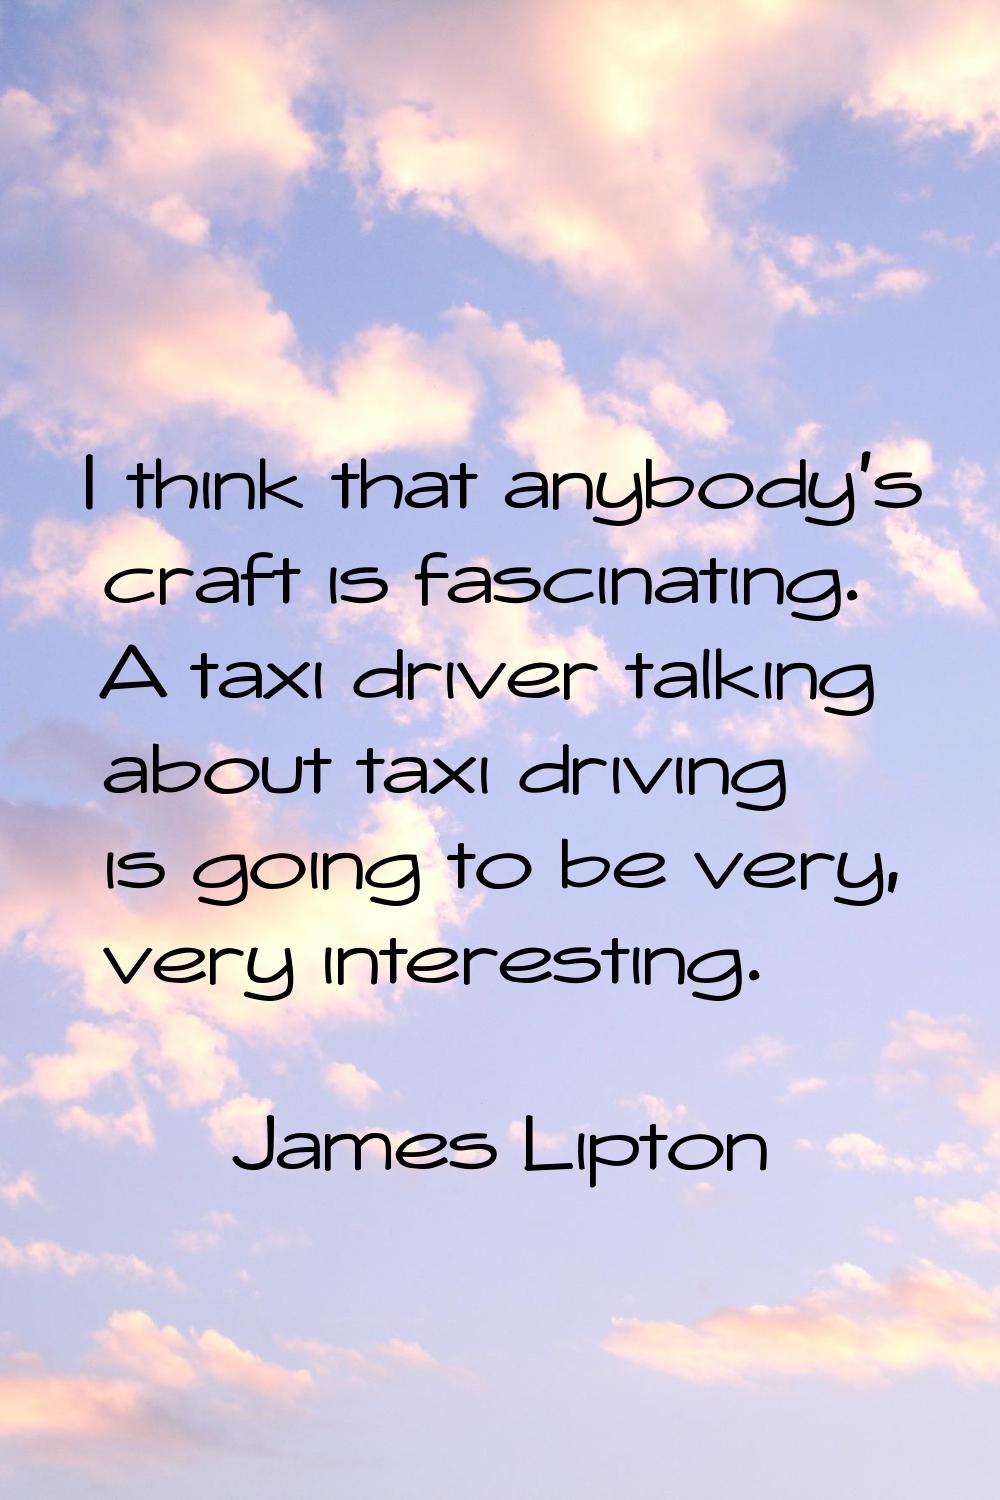 I think that anybody's craft is fascinating. A taxi driver talking about taxi driving is going to b